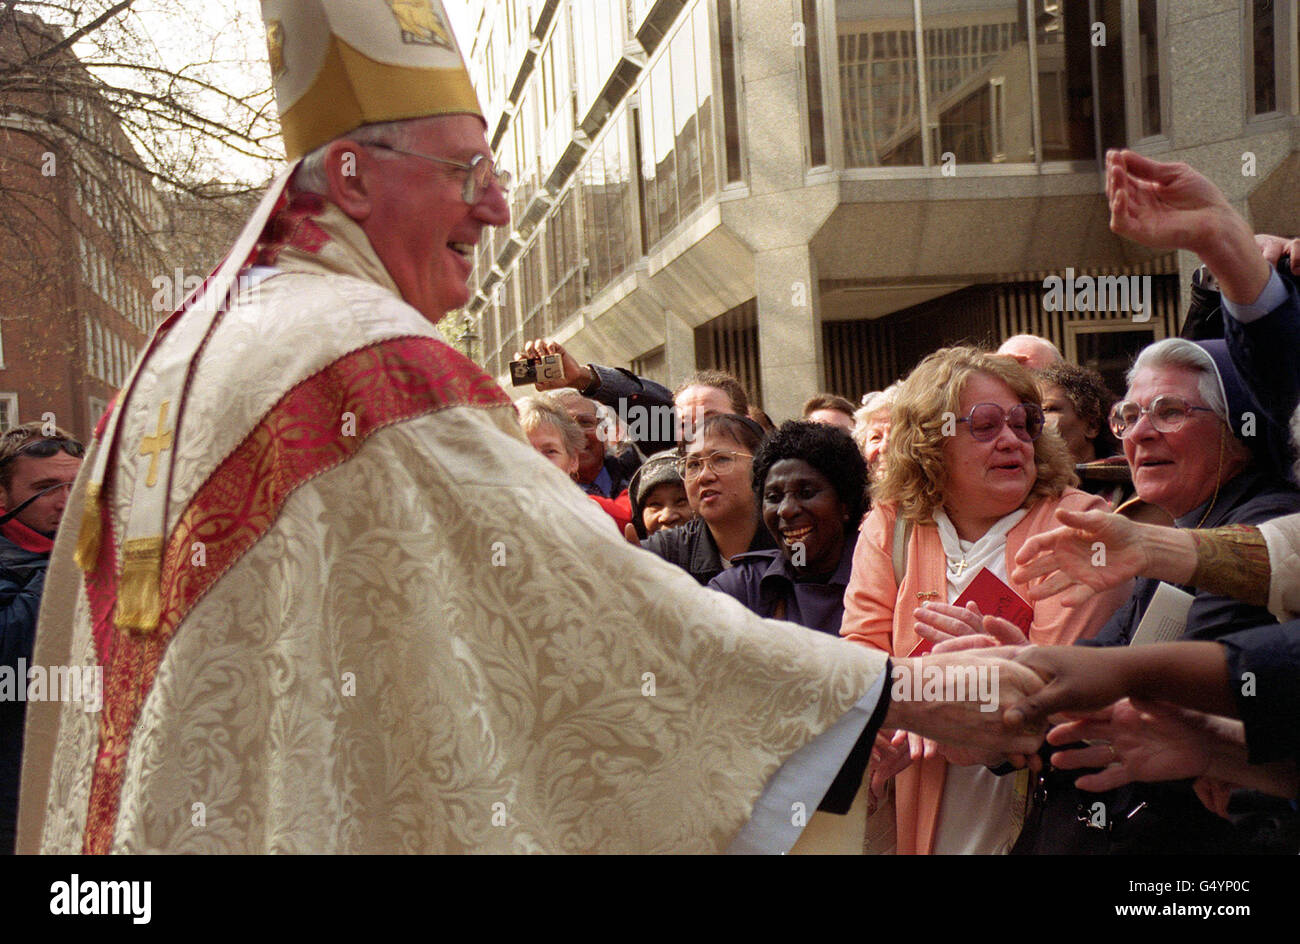 The new Archbishop of Westminster, the Most Rev Cormac Murphy-O'Connor, shakes hands with wellwishers on the steps of Westminster Cathedral in London, after his installation as head of the Roman Catholic church in England and Wales. Stock Photo